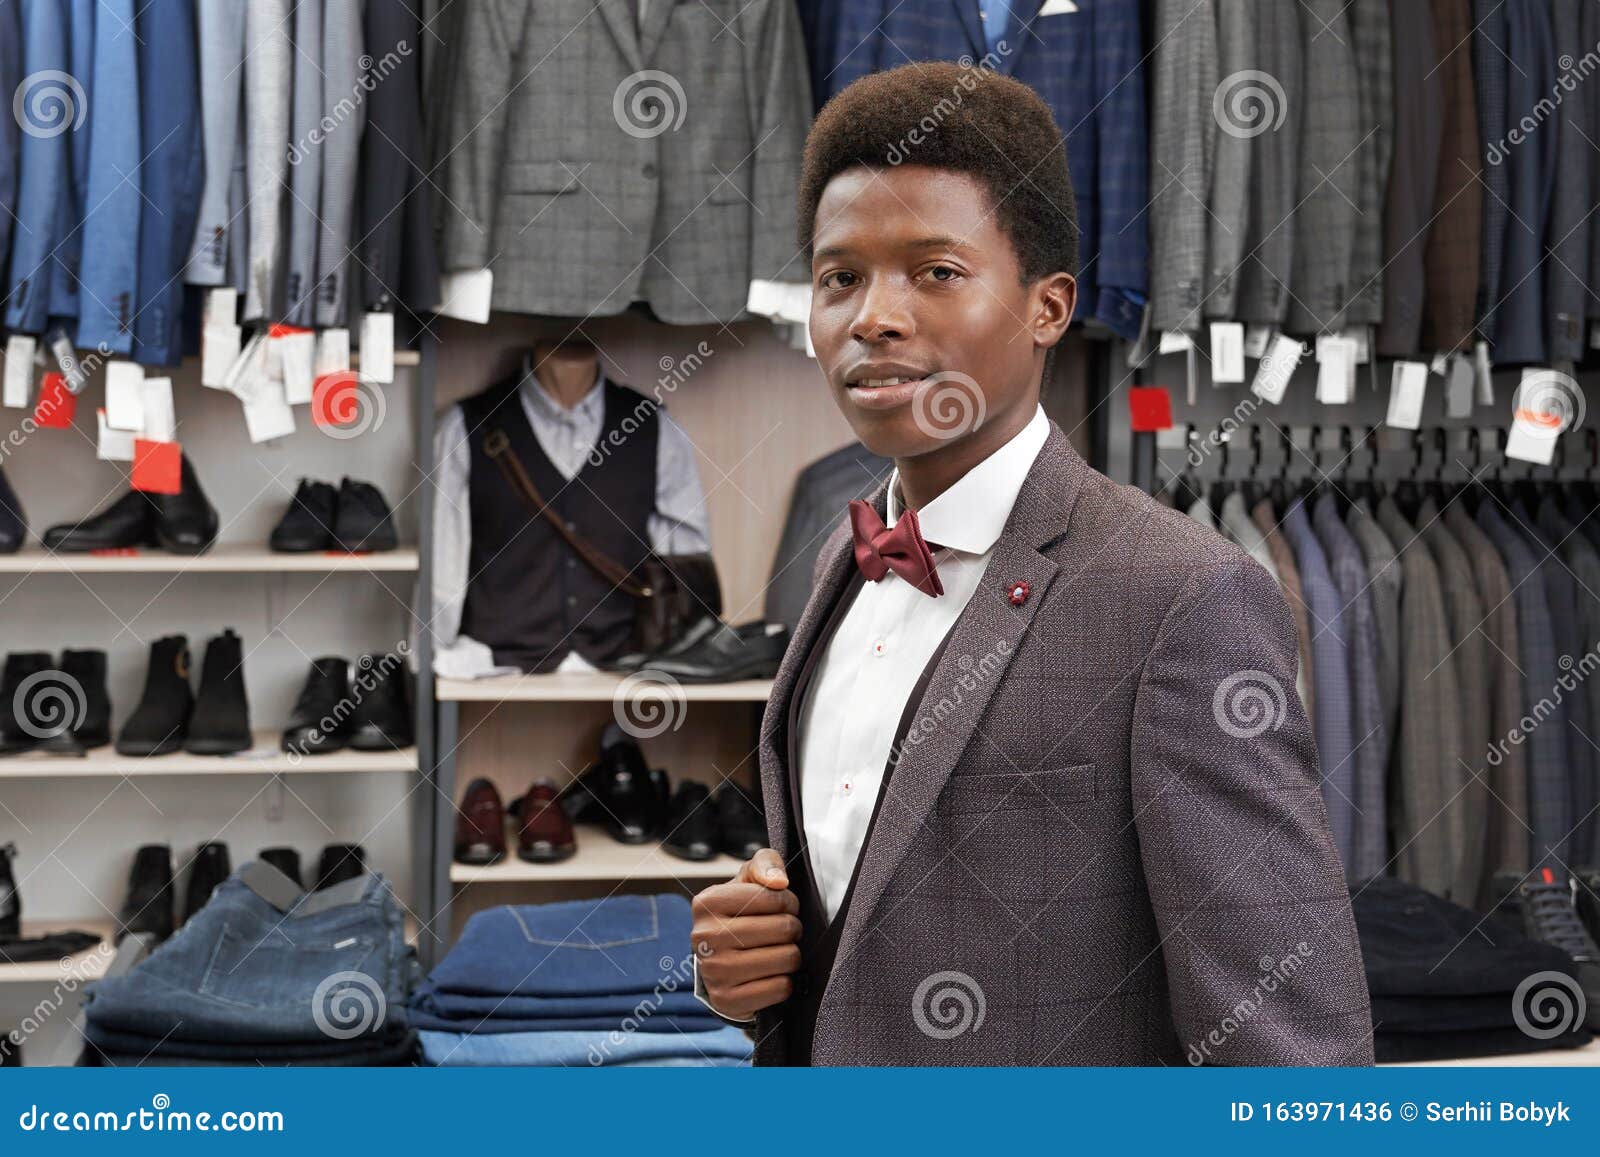 African Man Posing in Boutique in White Shirt, Stylish Suit. Stock ...